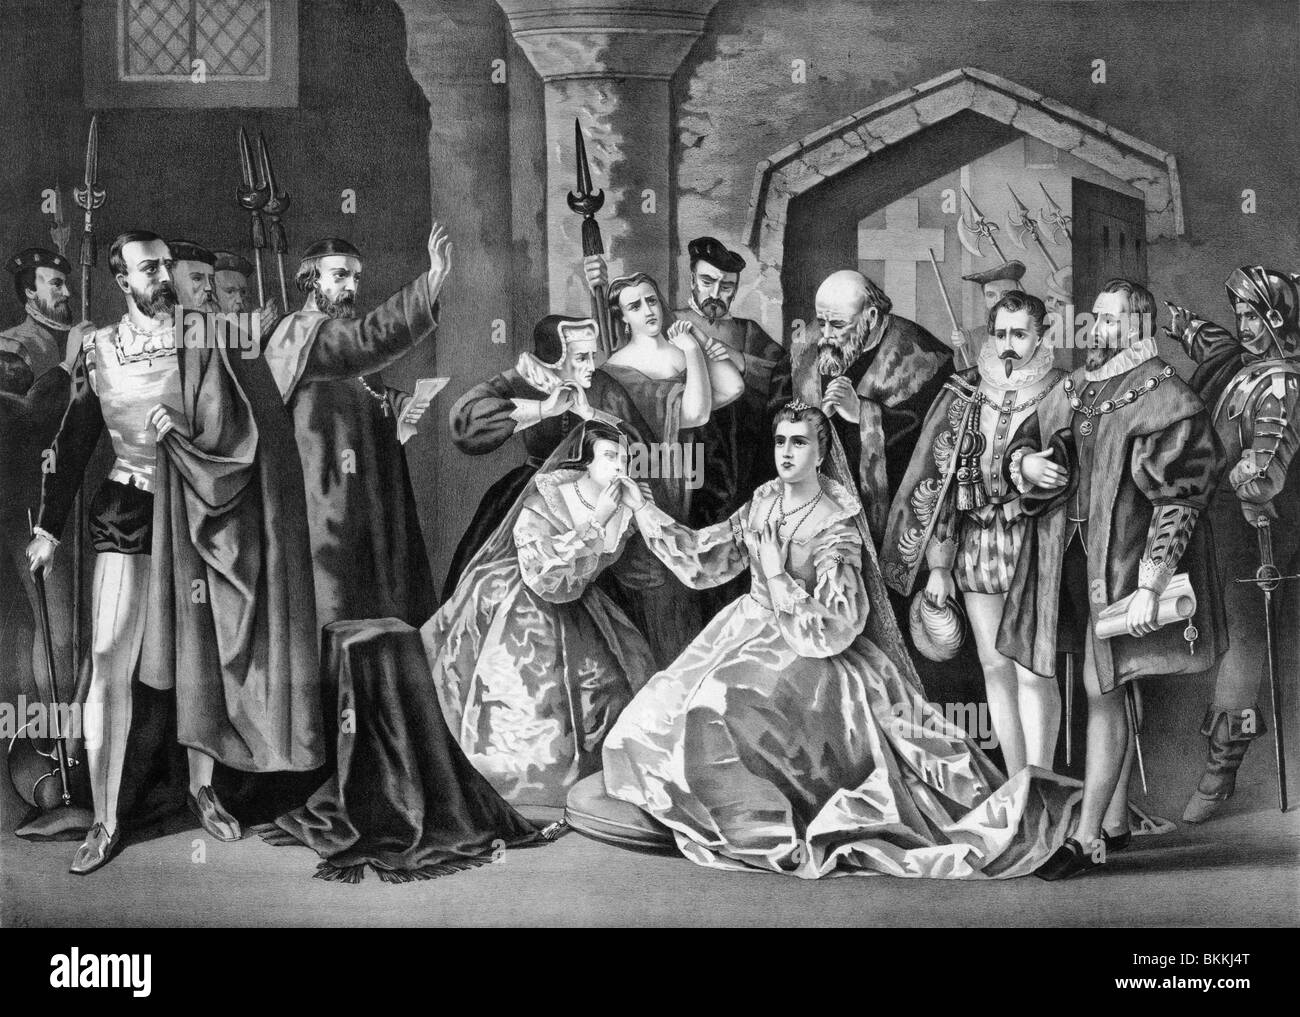 Vintage print depicting Mary I of Scotland, also known as Mary Queen of Scots, preparing to be executed for treason in 1587. Stock Photo